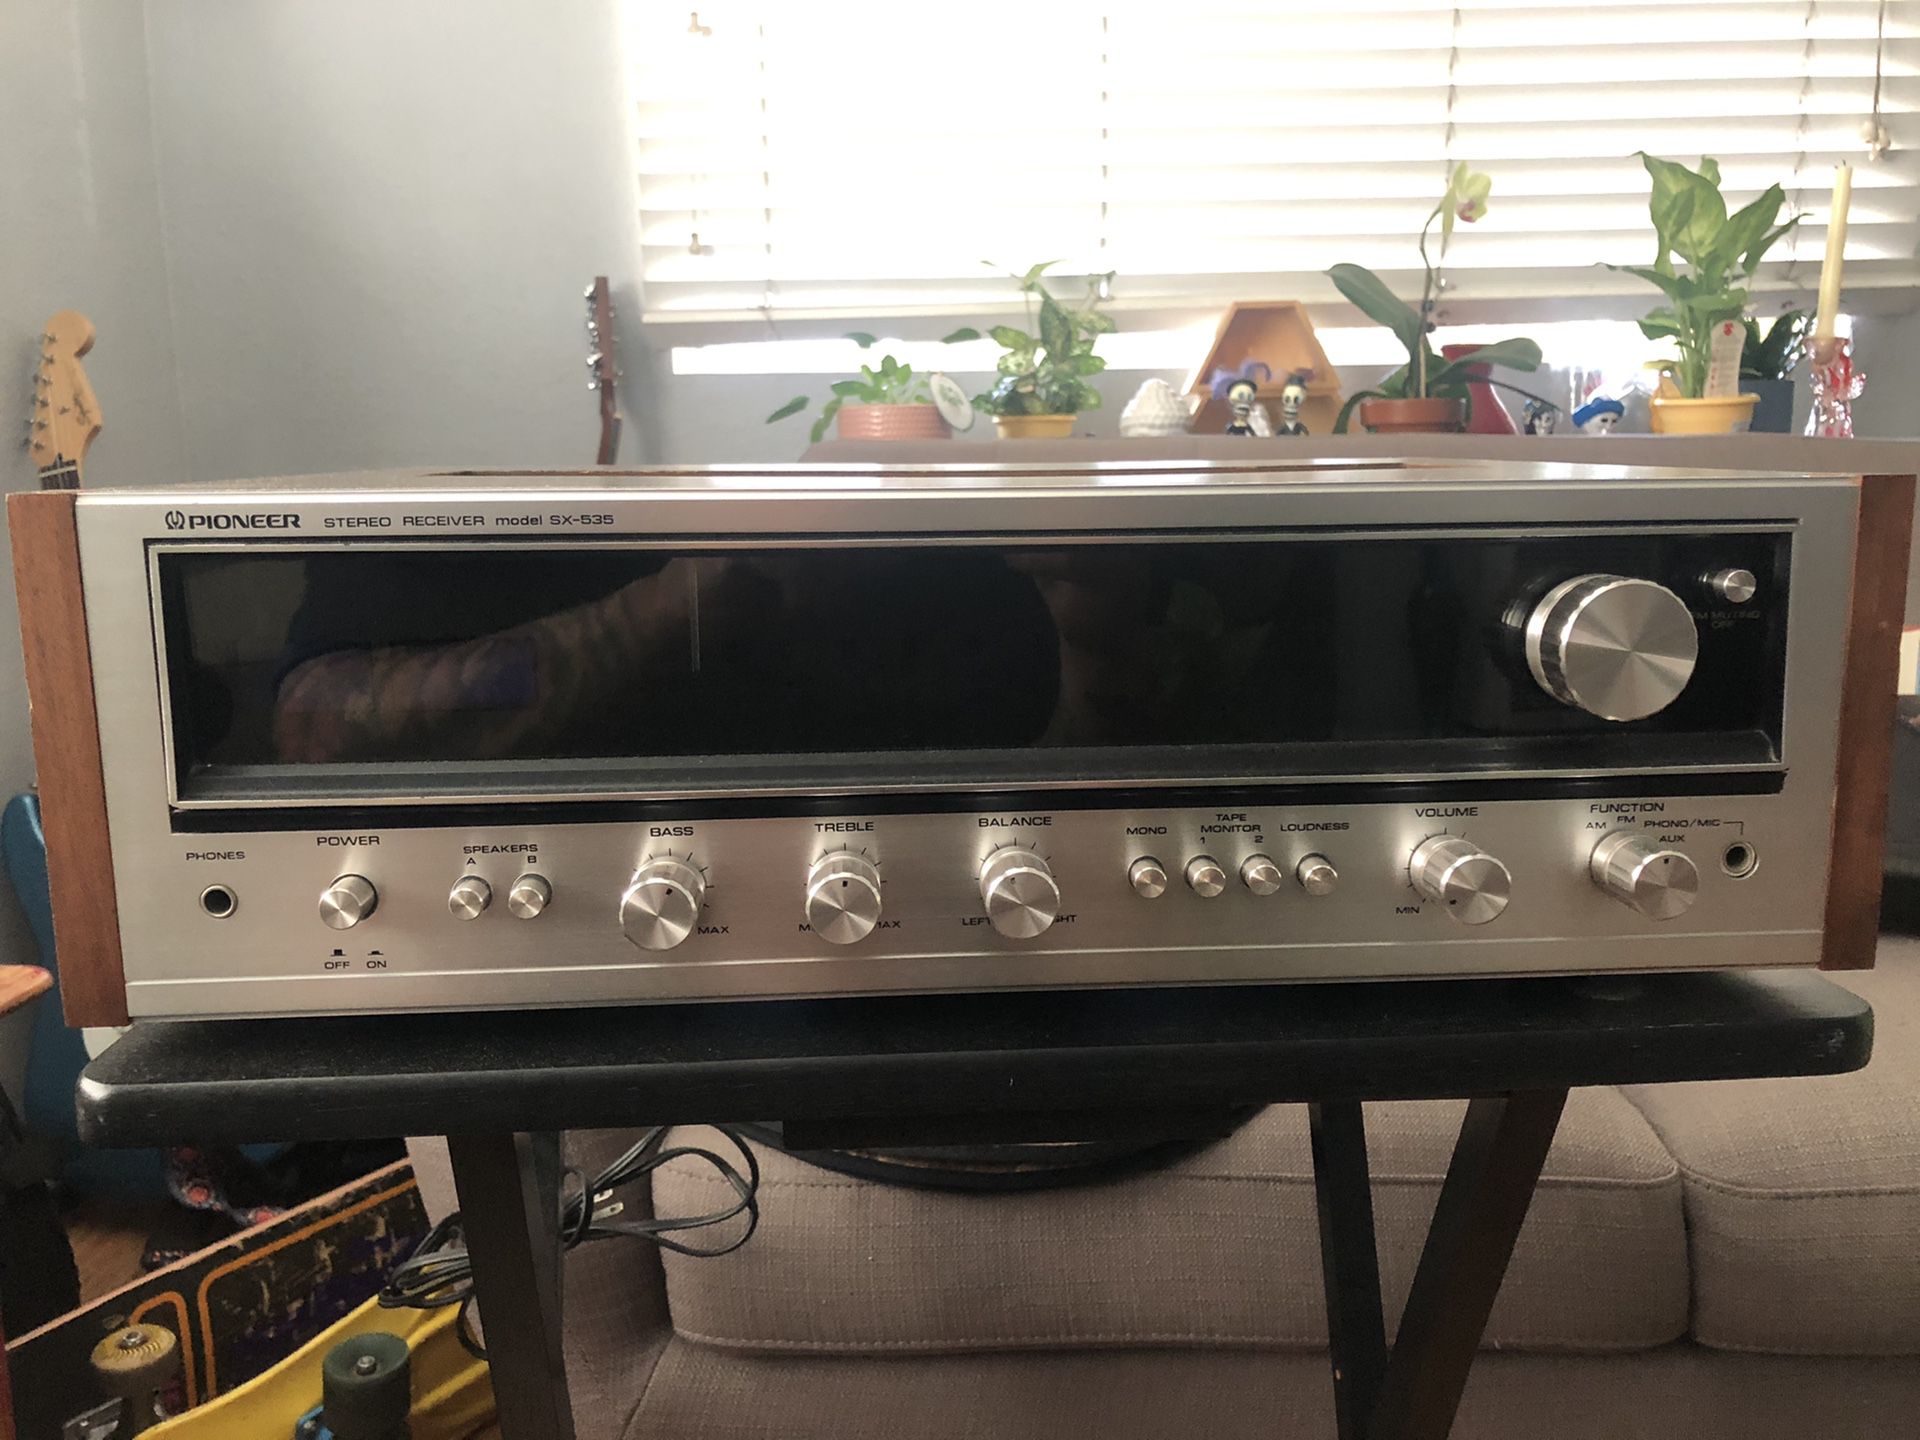 Pioneer SX-535 Stereo receiver for sale!